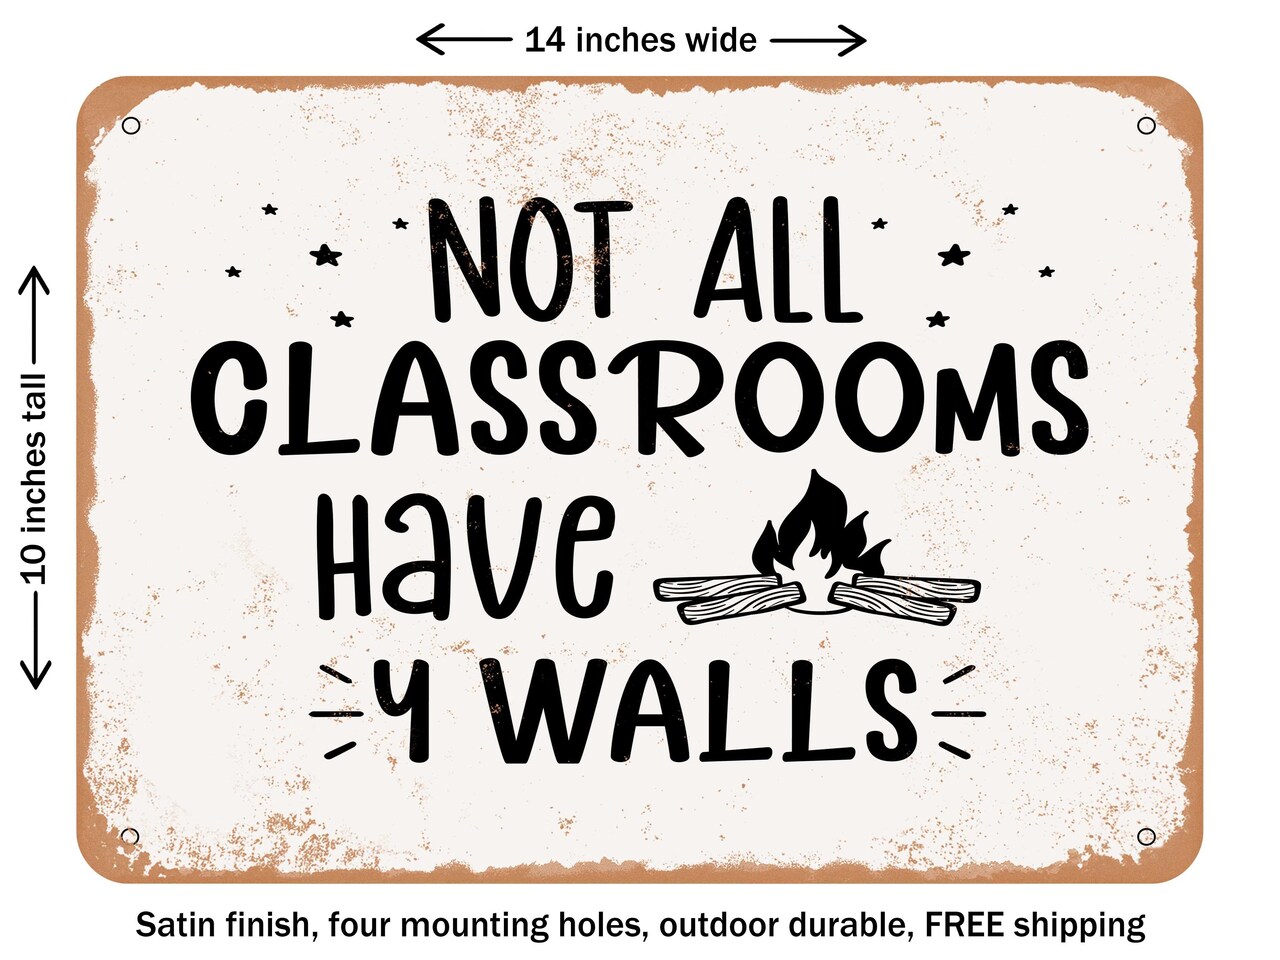 DECORATIVE METAL SIGN - Not All Classrooms Have Walls - Vintage Rusty Look